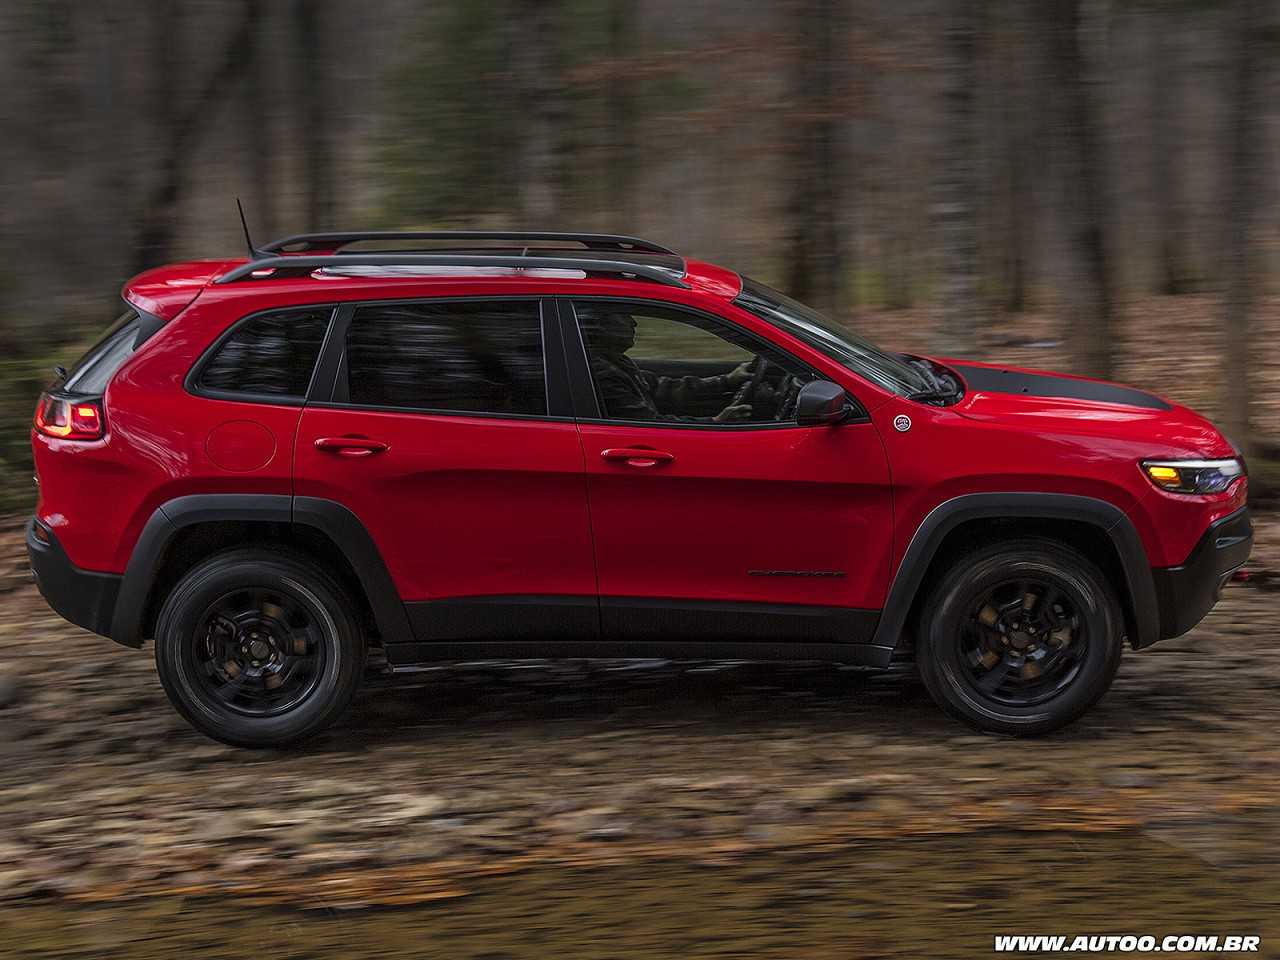 JeepCherokee 2019 - lateral